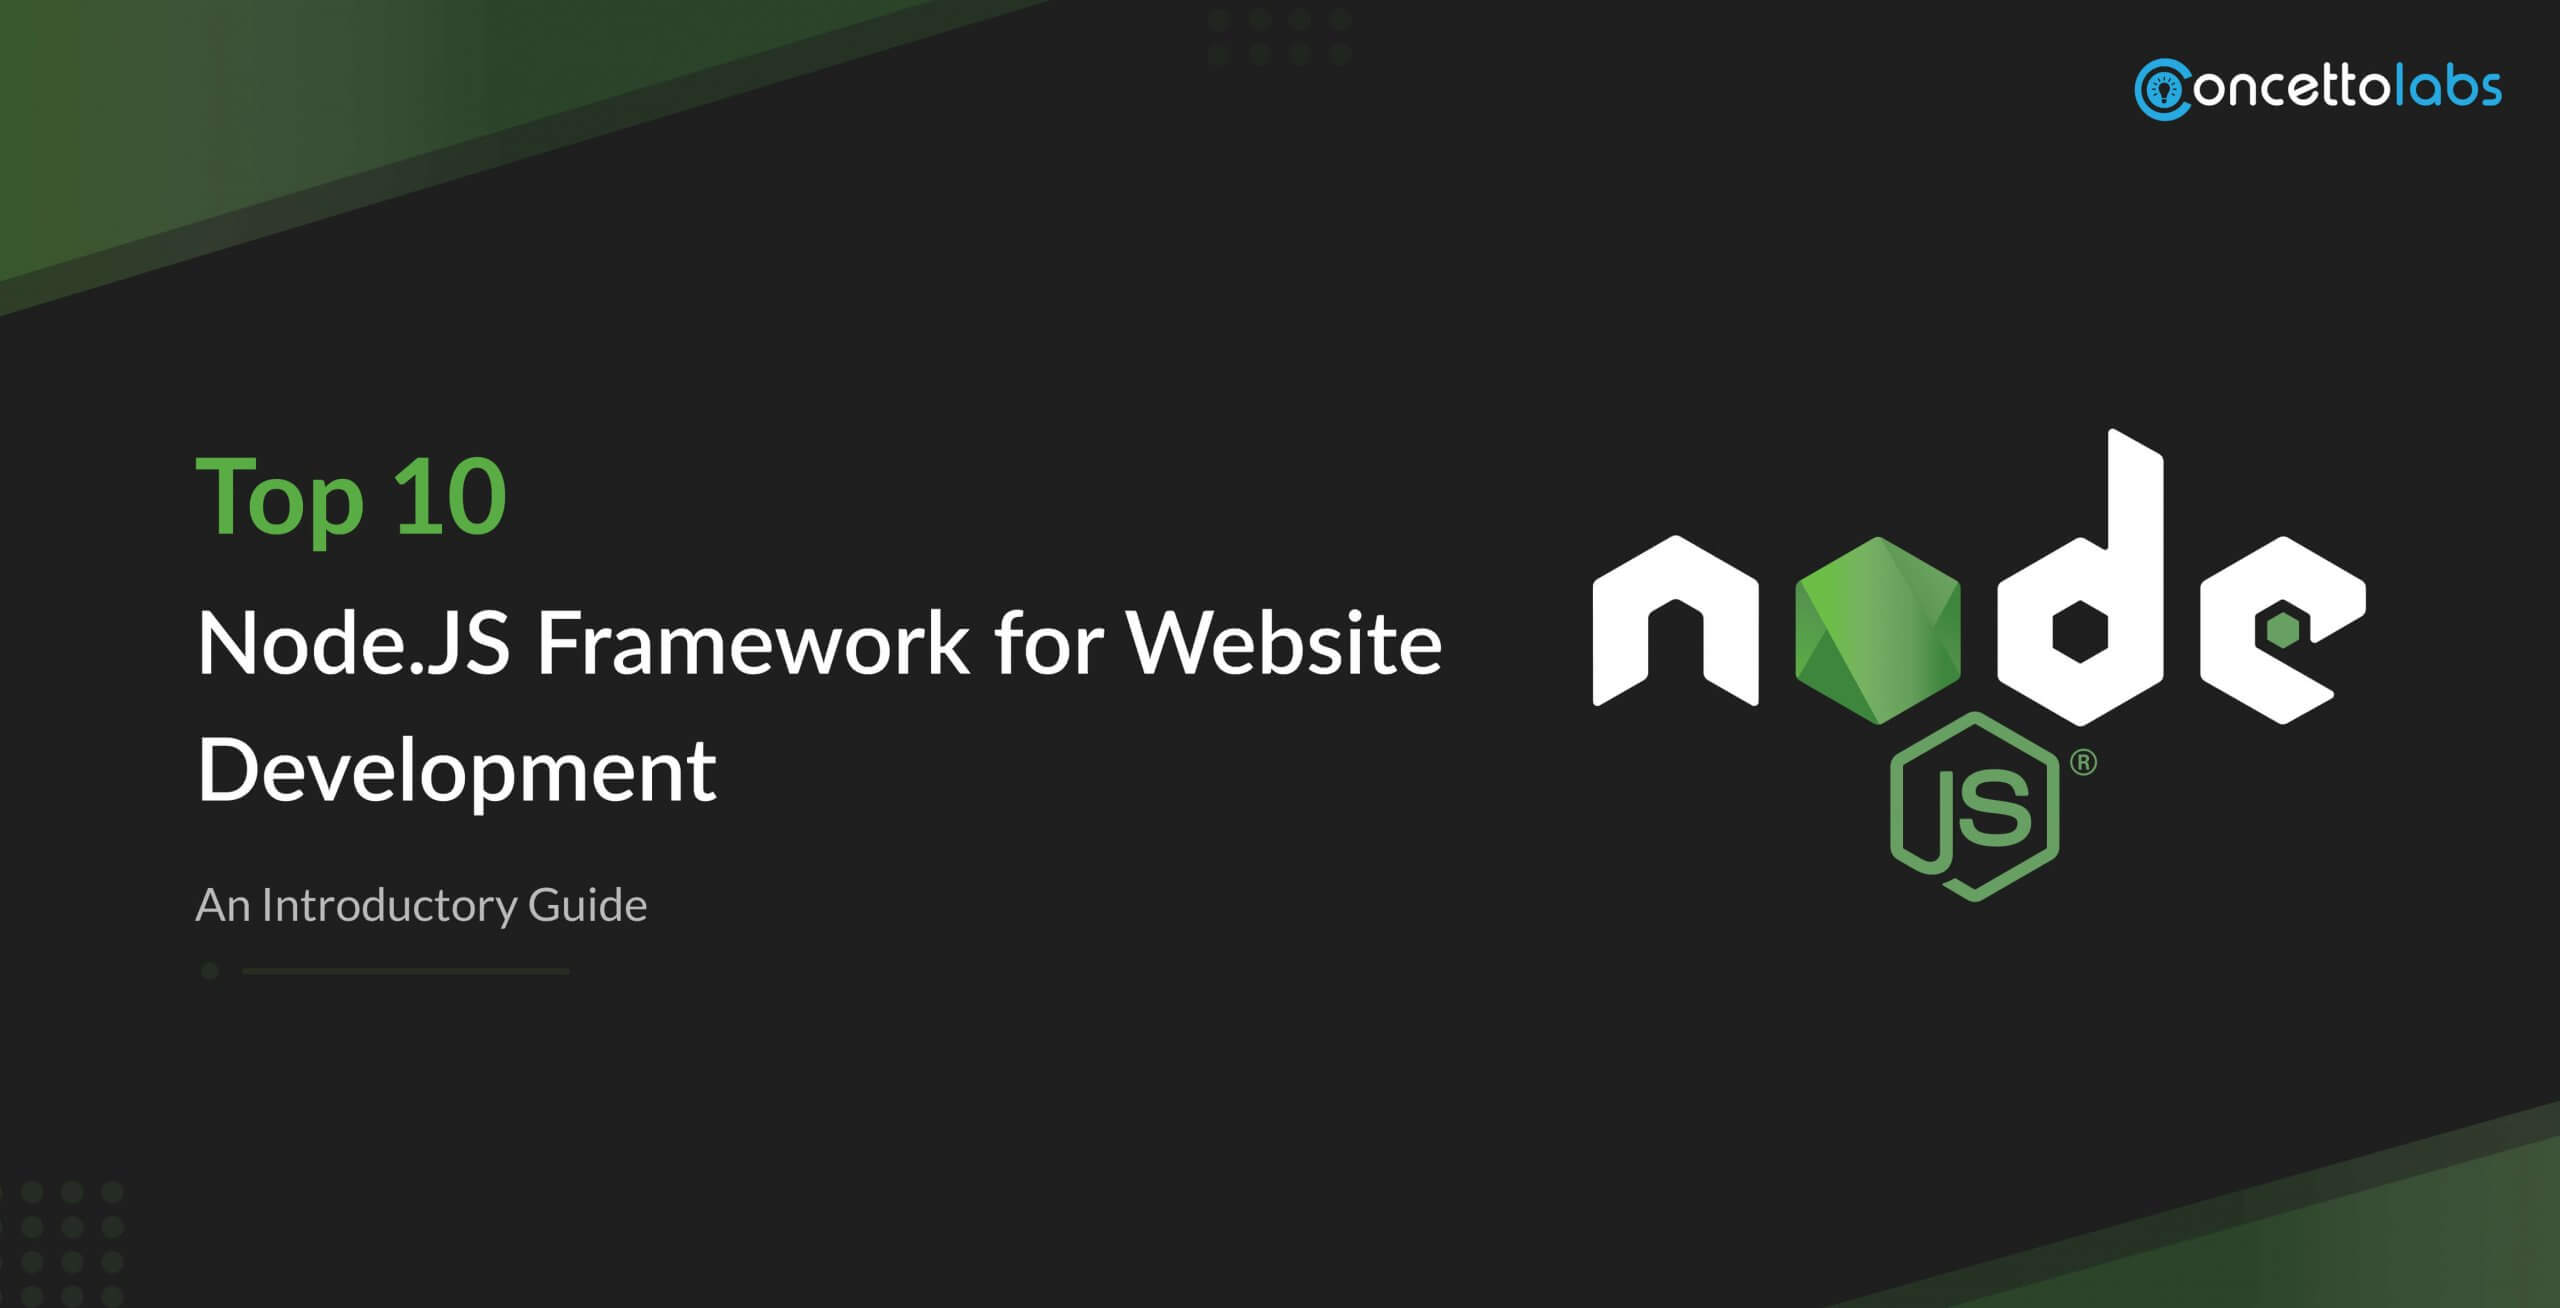 Which Are The Top 10 Node.js Frameworks - Features and Advantages?